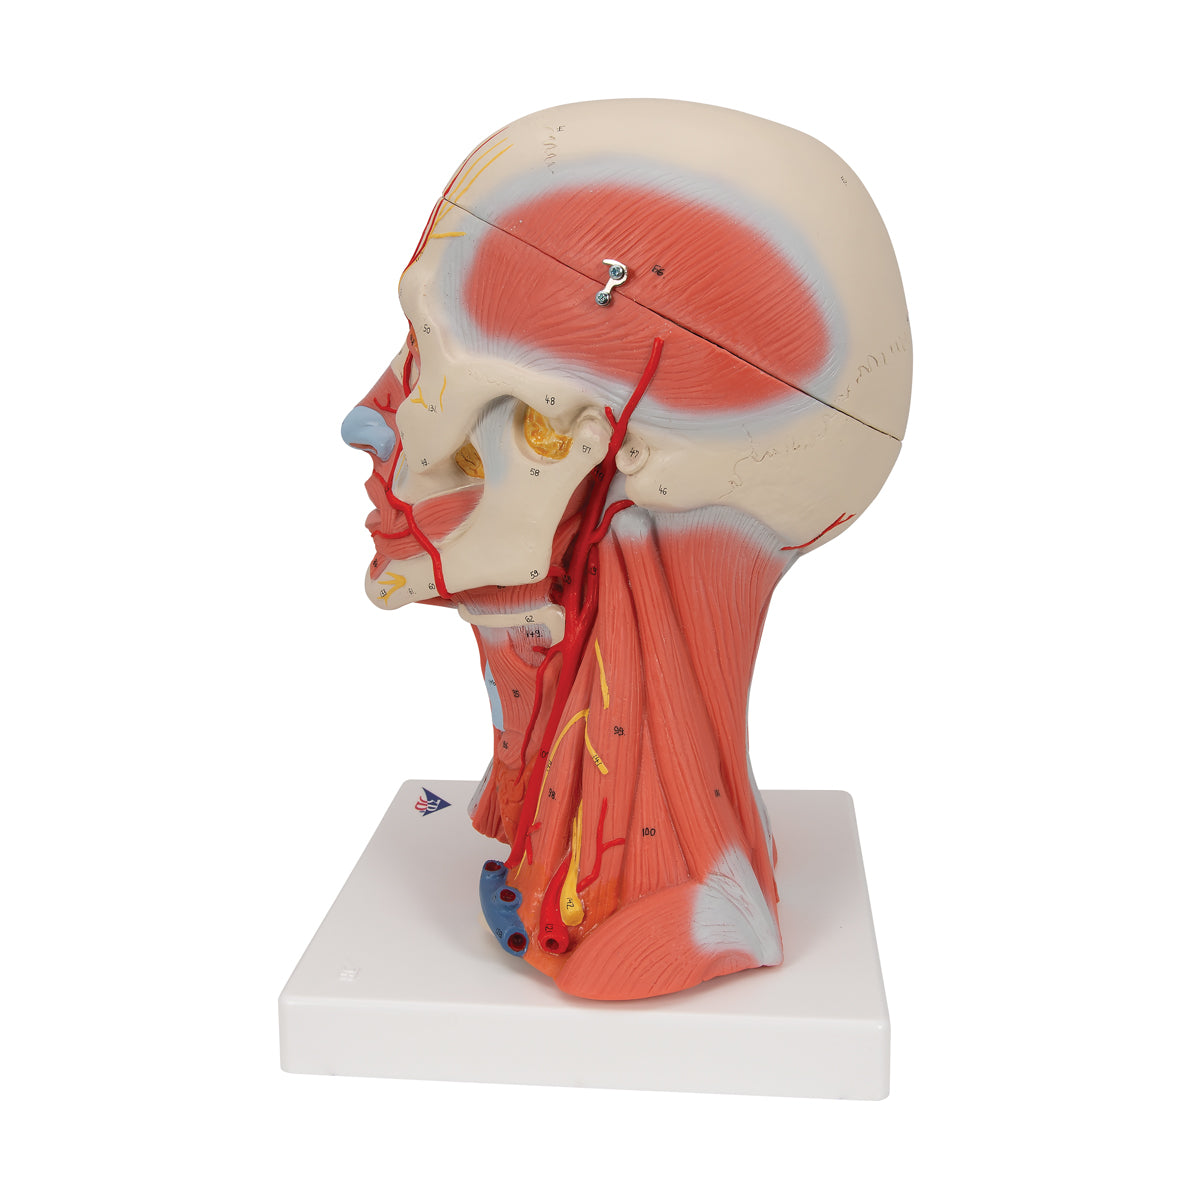 Model of head and neck muscles in 5 parts